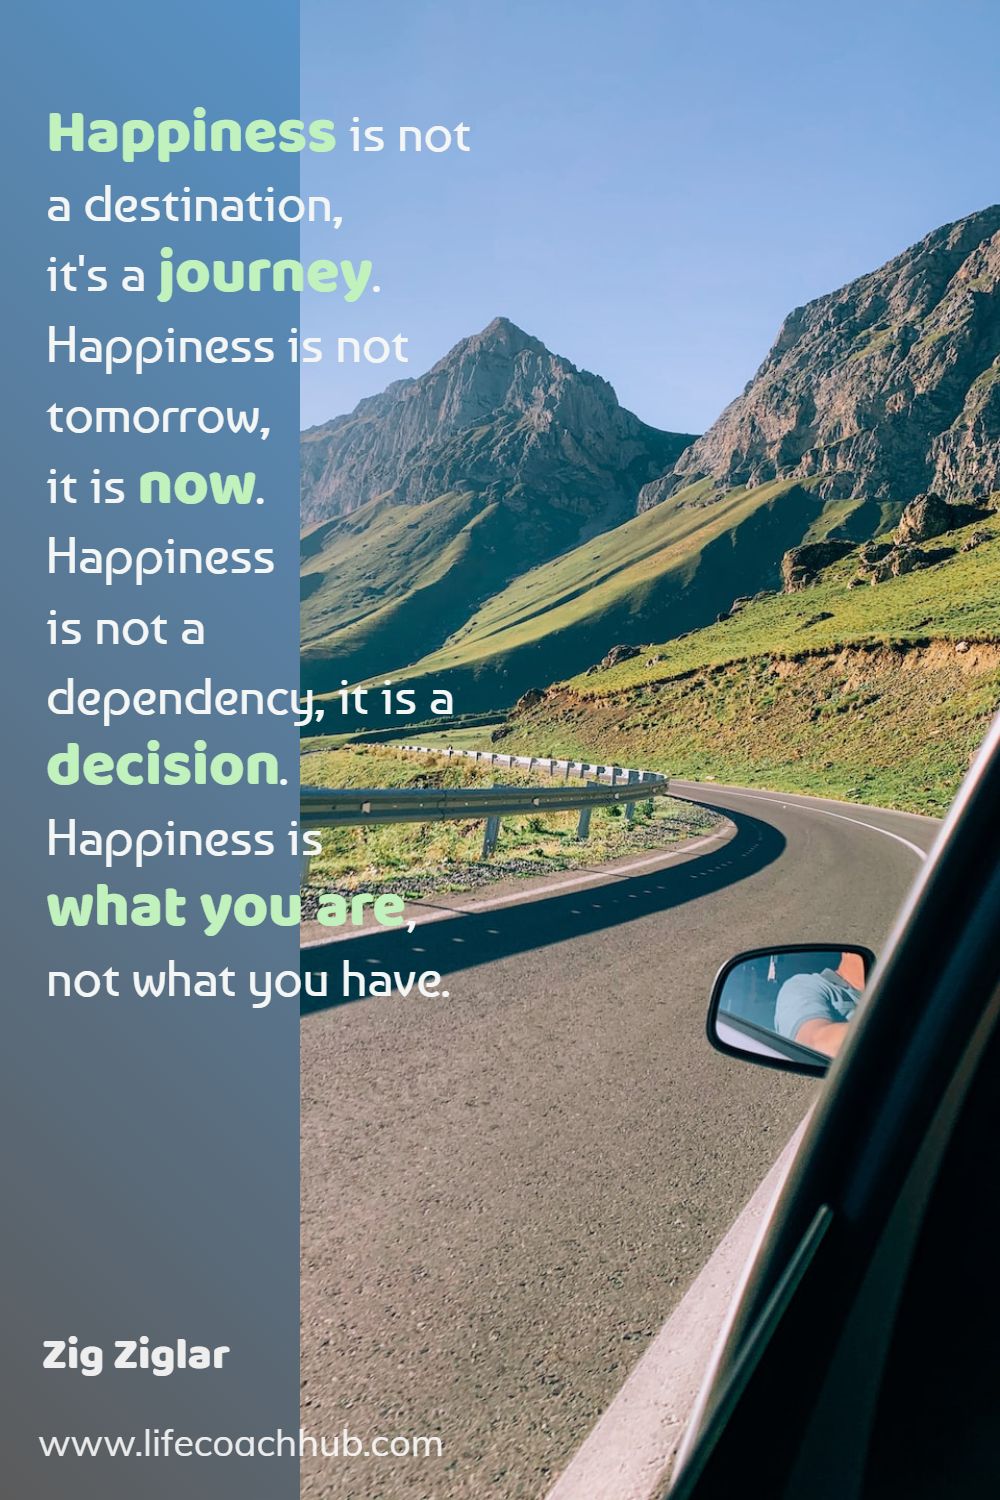 Happiness is not a destination, it's a journey. Happiness is not tomorrow, it is now. Happiness is not a dependency, it is a decision. Happiness is what you are, not what you have. Zig Ziglar Coaching Quote